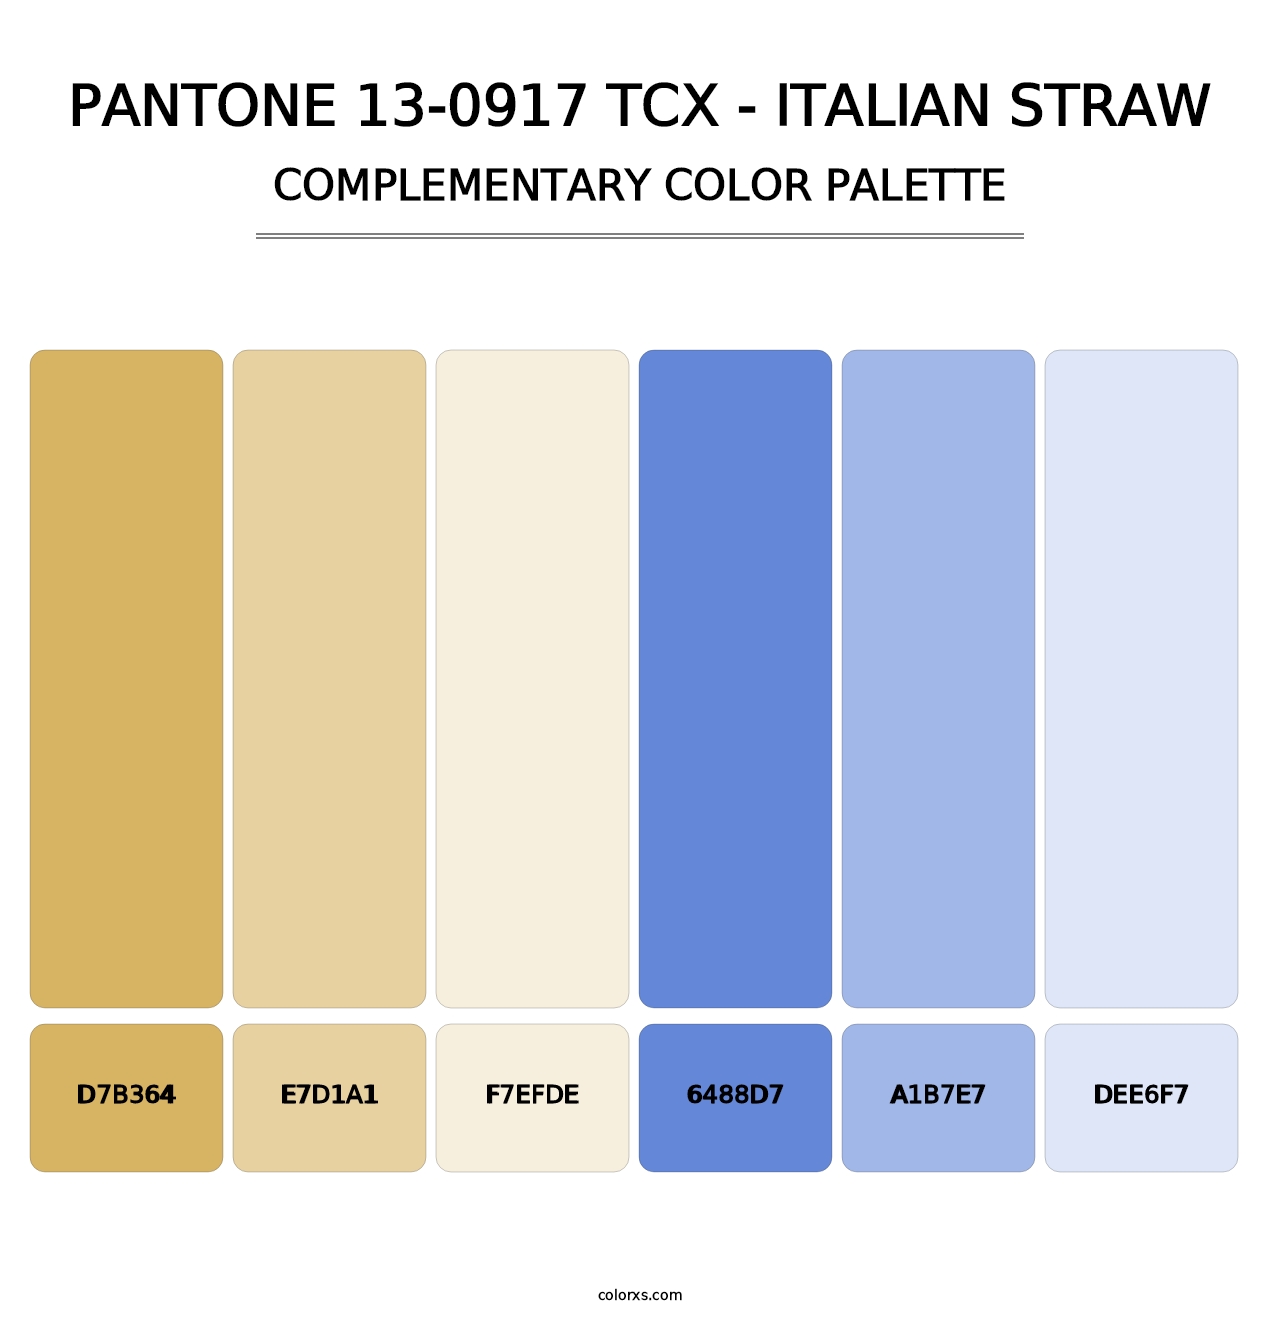 PANTONE 13-0917 TCX - Italian Straw - Complementary Color Palette